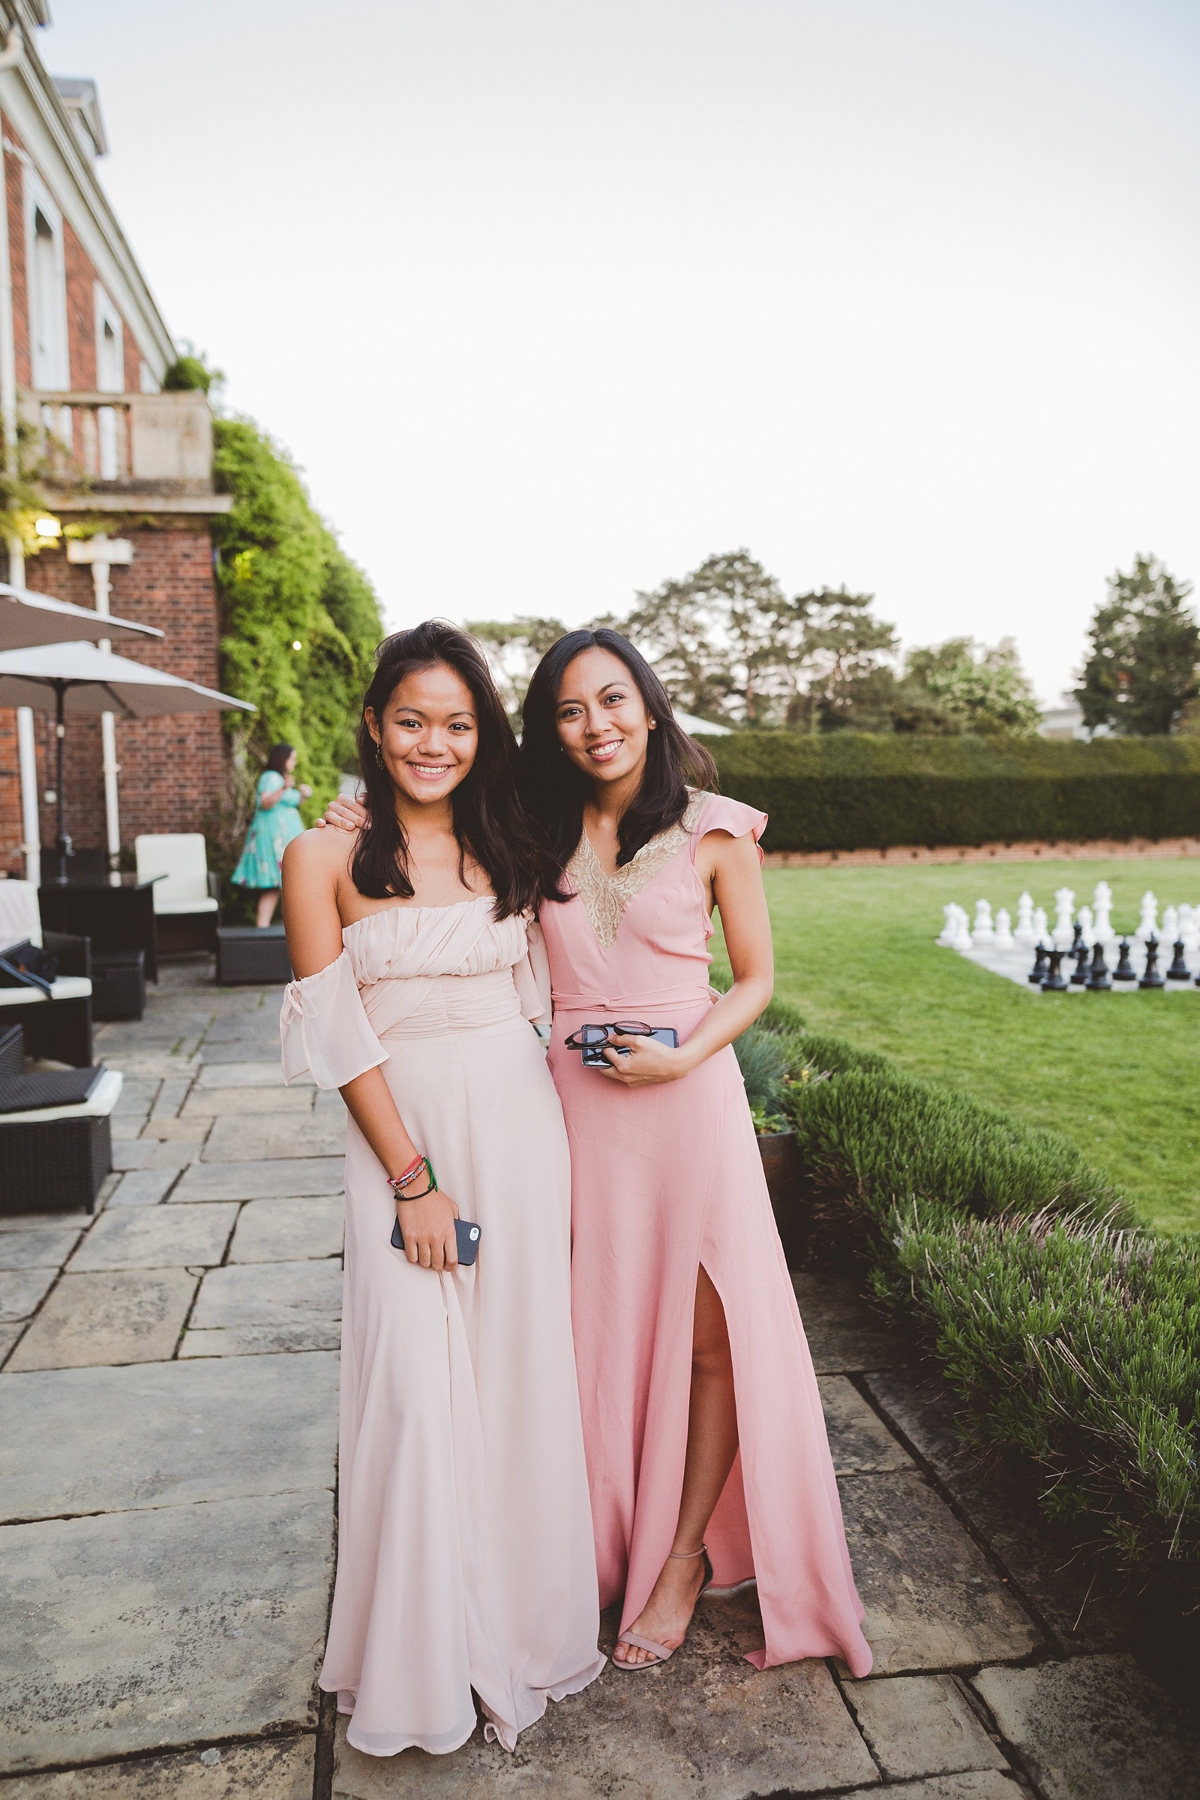 37 Friends and family focussed wedding at an English country house